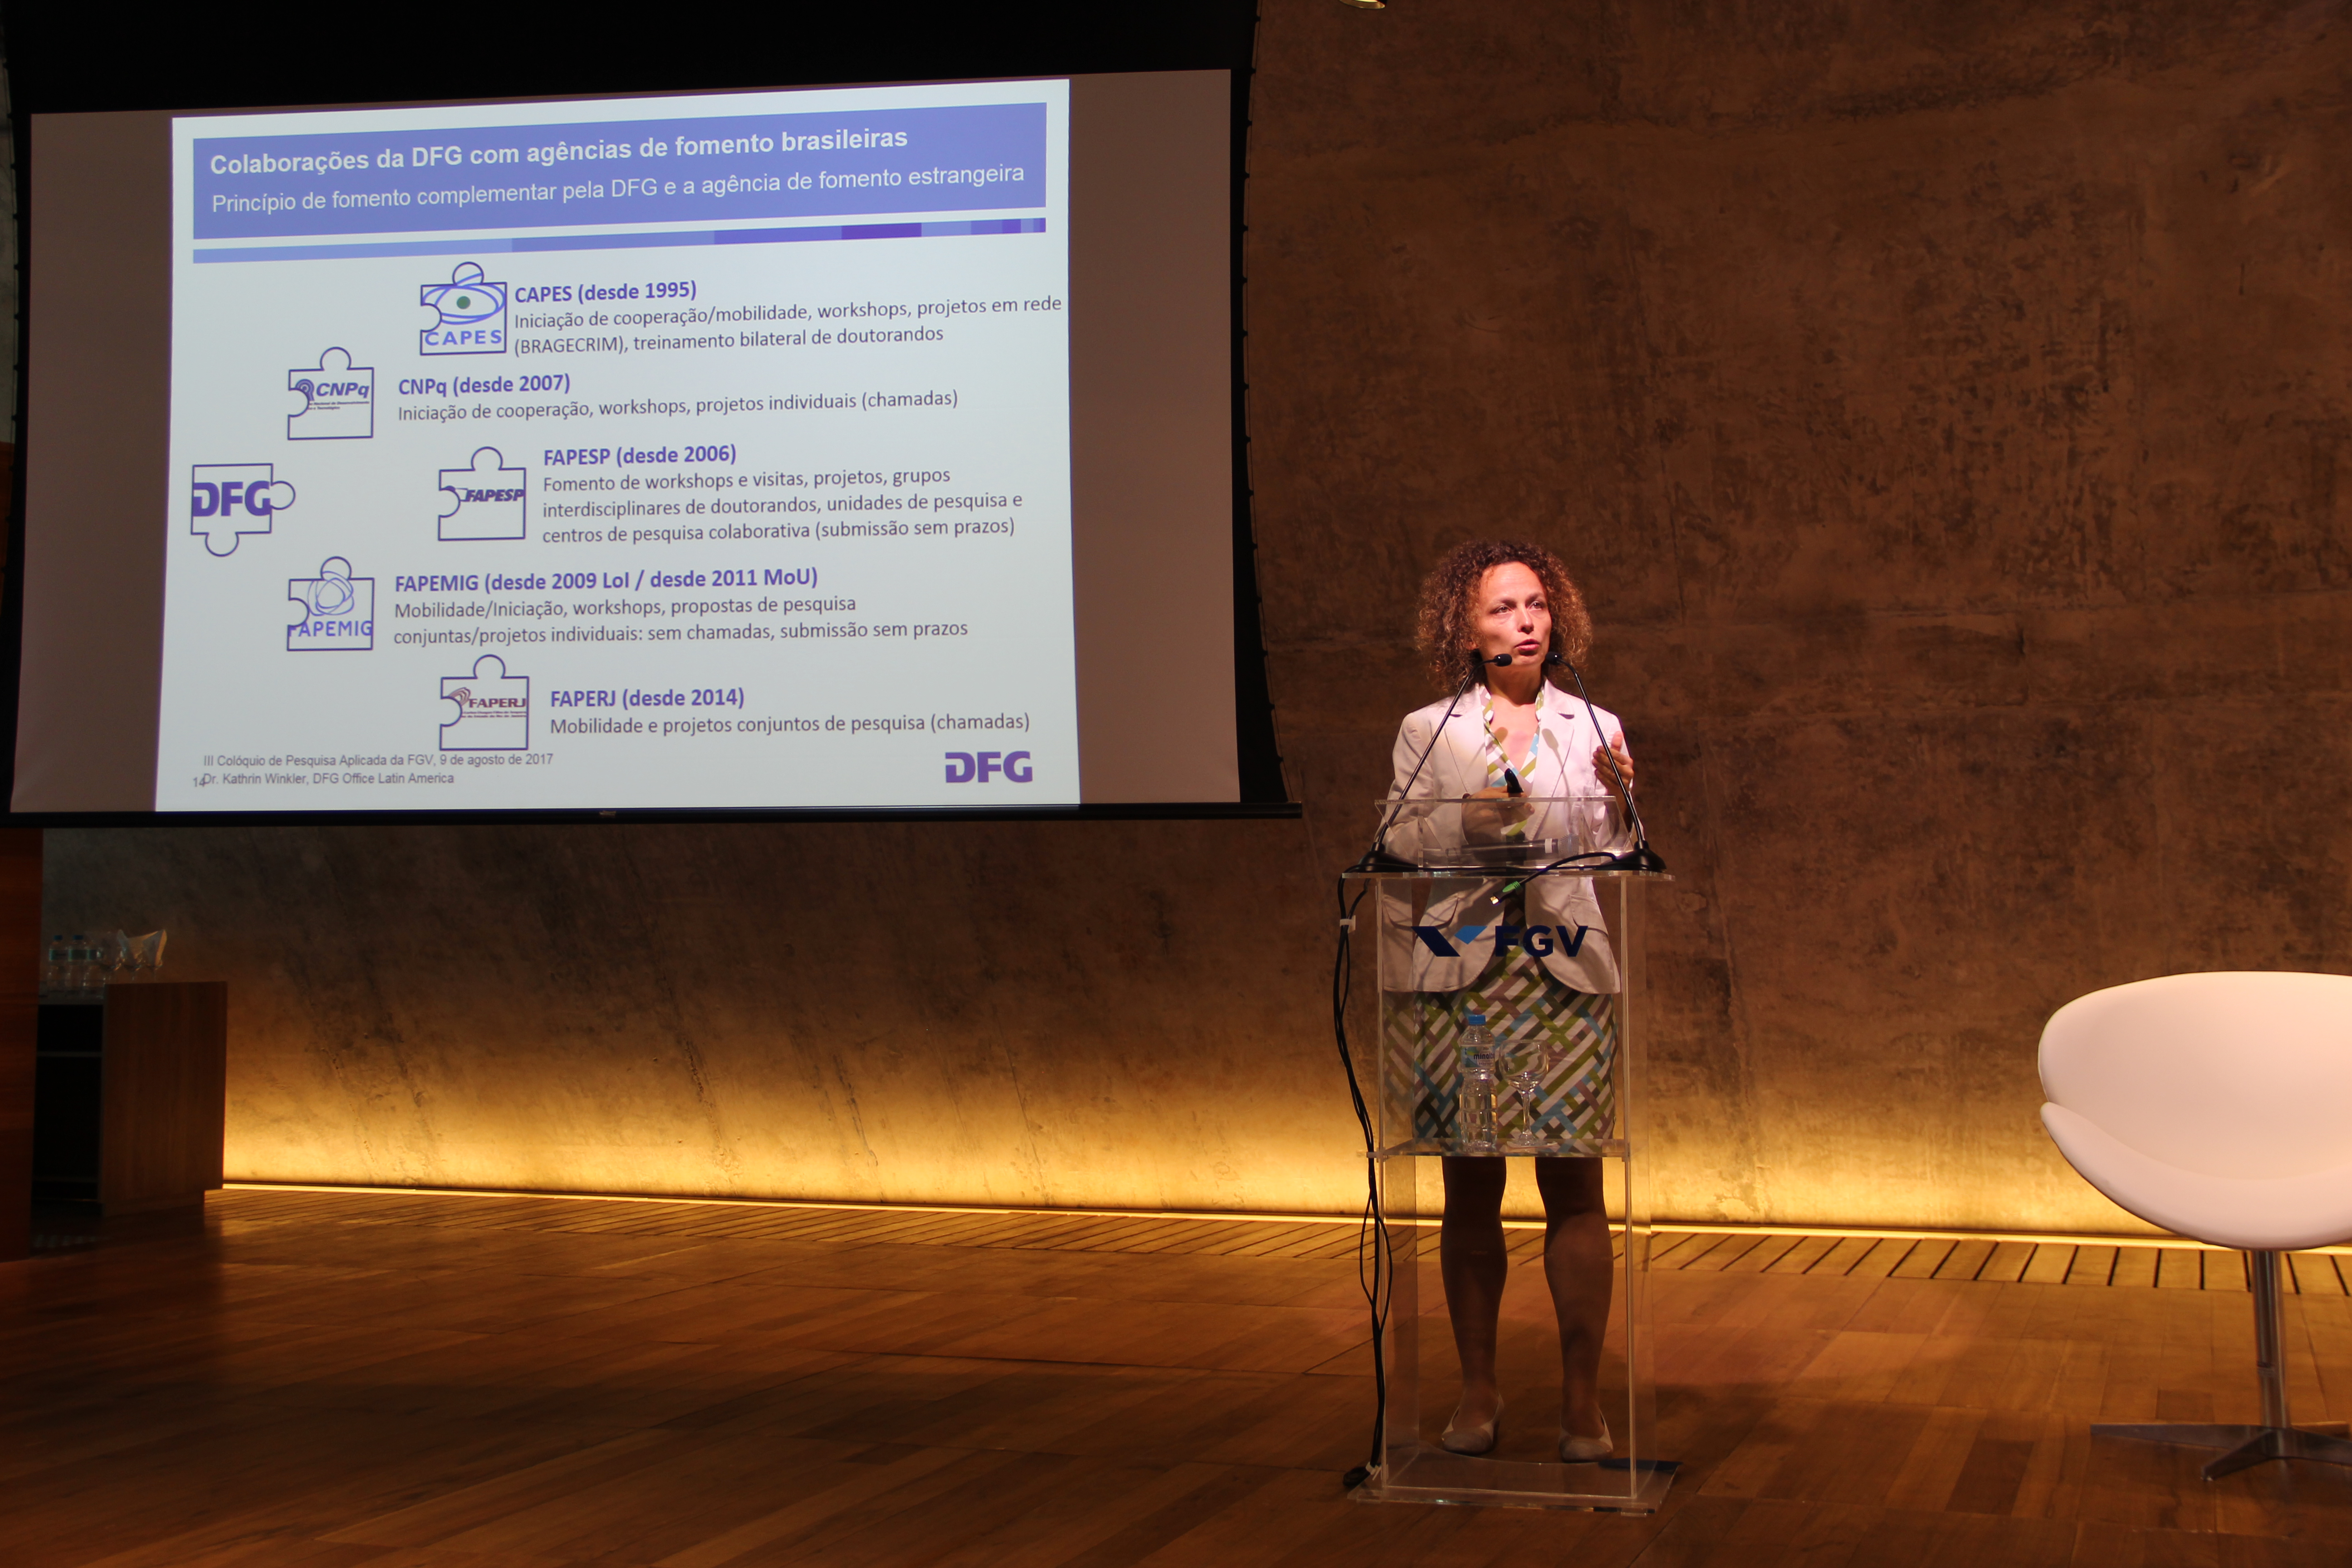 Kathrin Winkler presented the activities of the DFG’s Latin America office